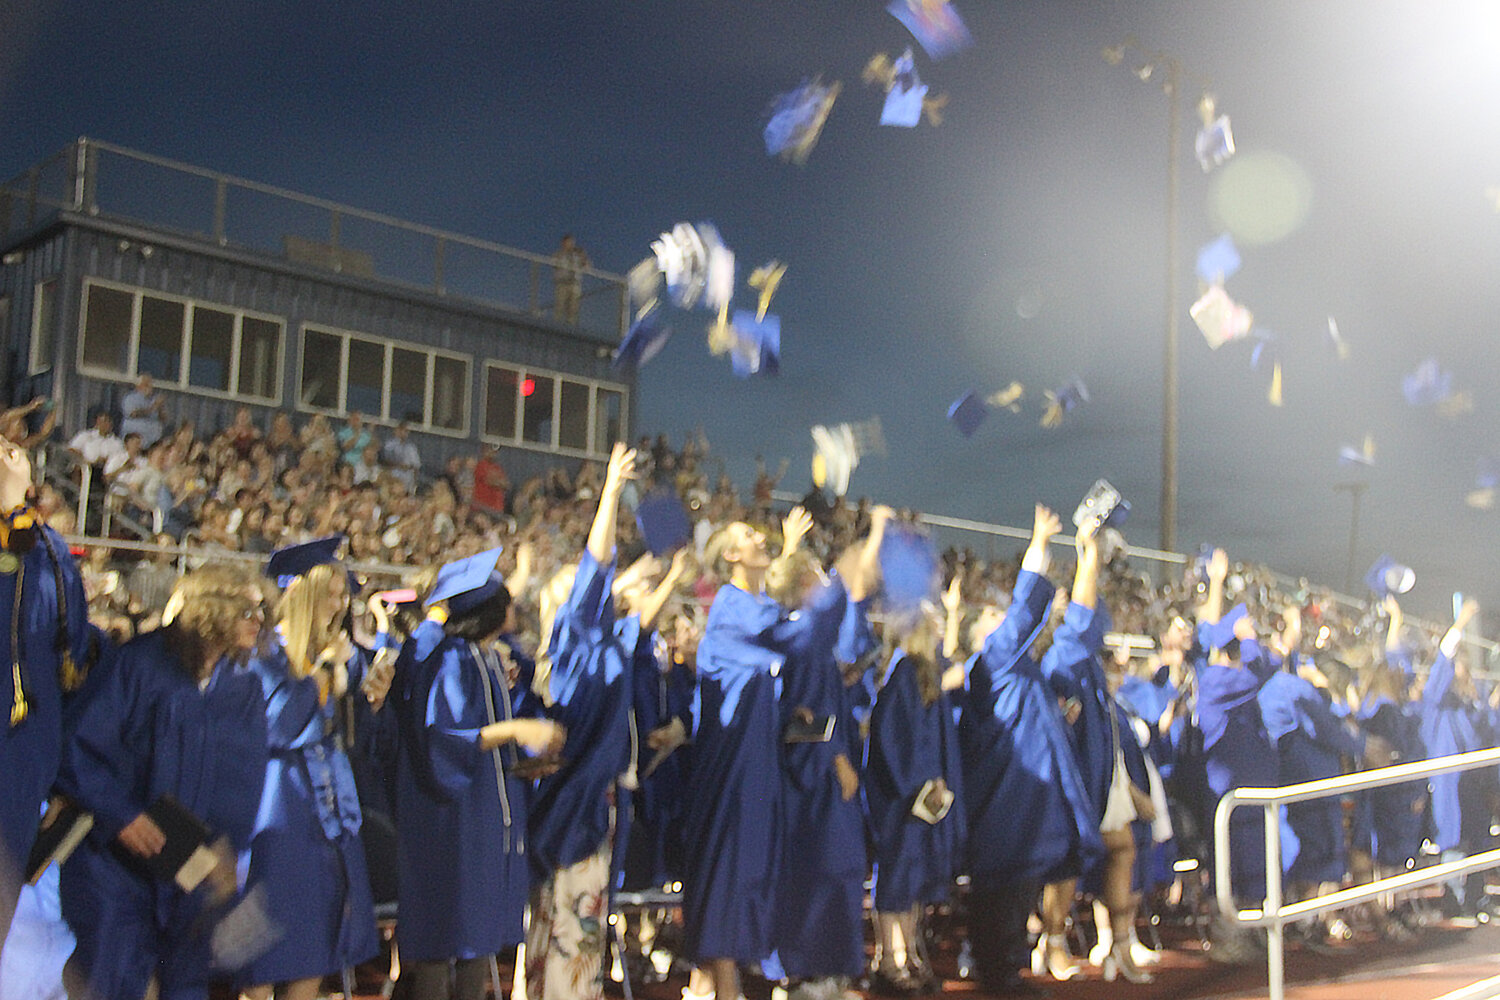 The newest Wright City High School alumni toss their caps into the air at the end of the graduation ceremony on June 2.